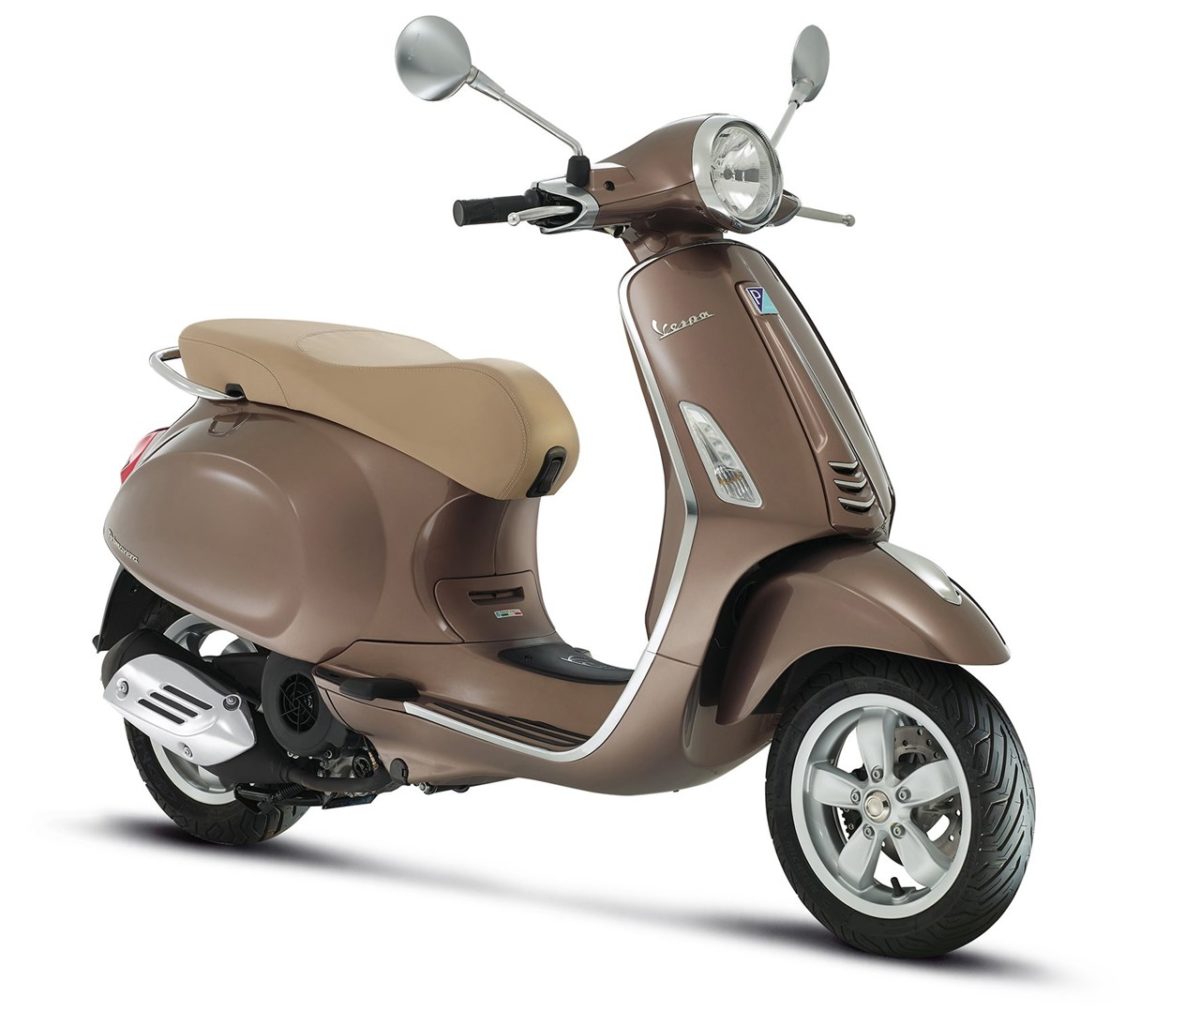 Vespa Elegante to be launched during Diwali